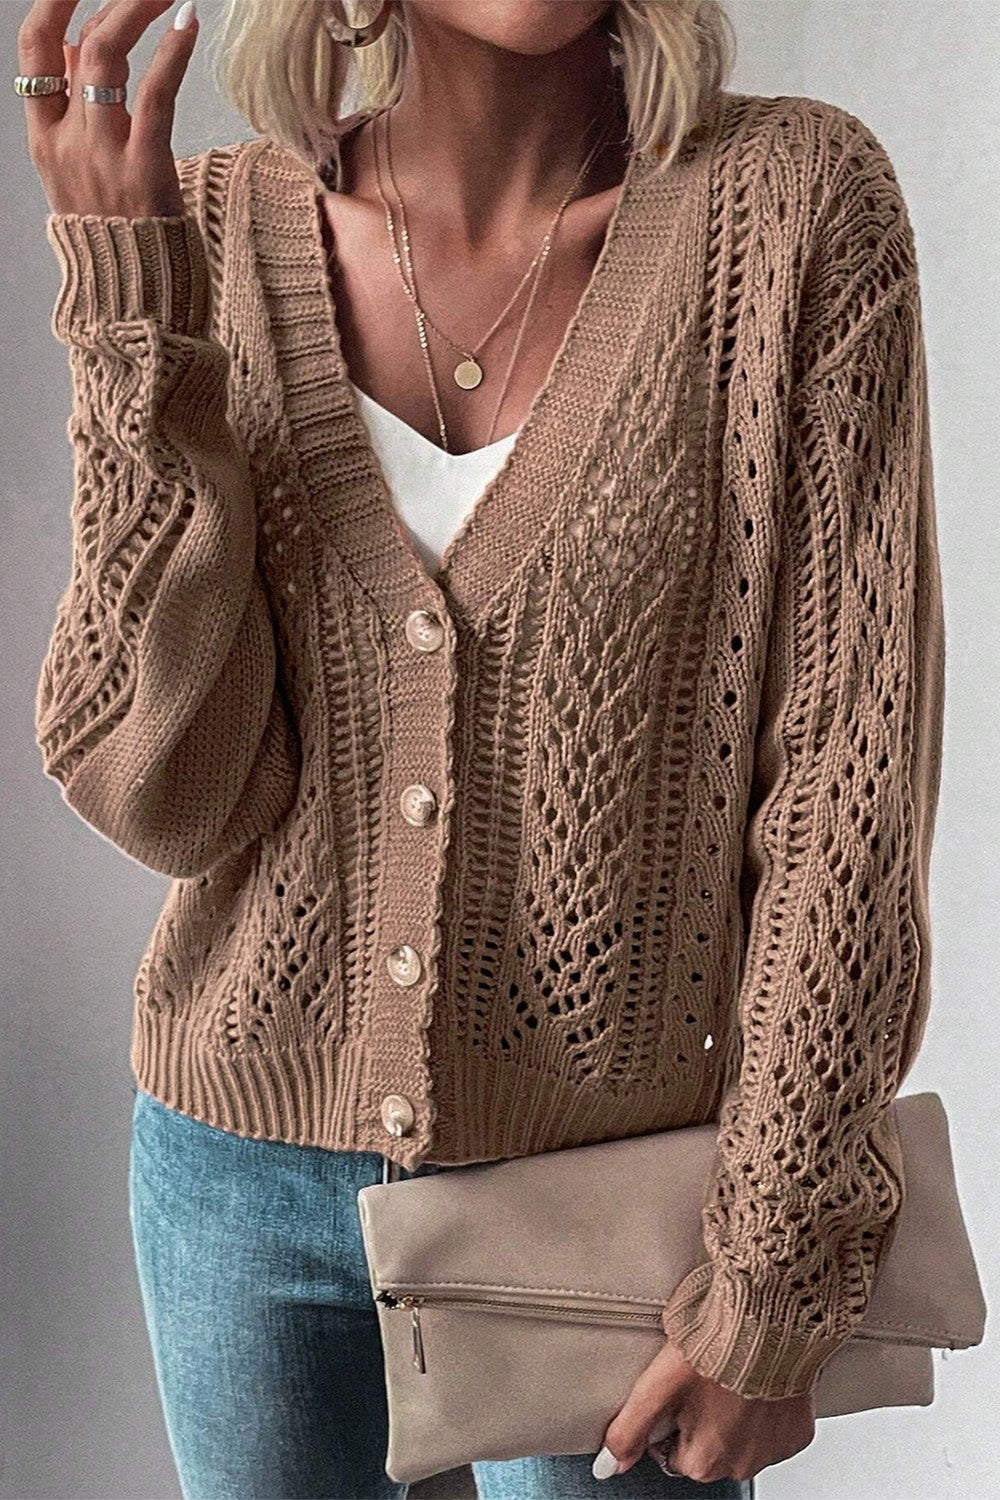 Openwork Button Up Long Sleeve Cardigan